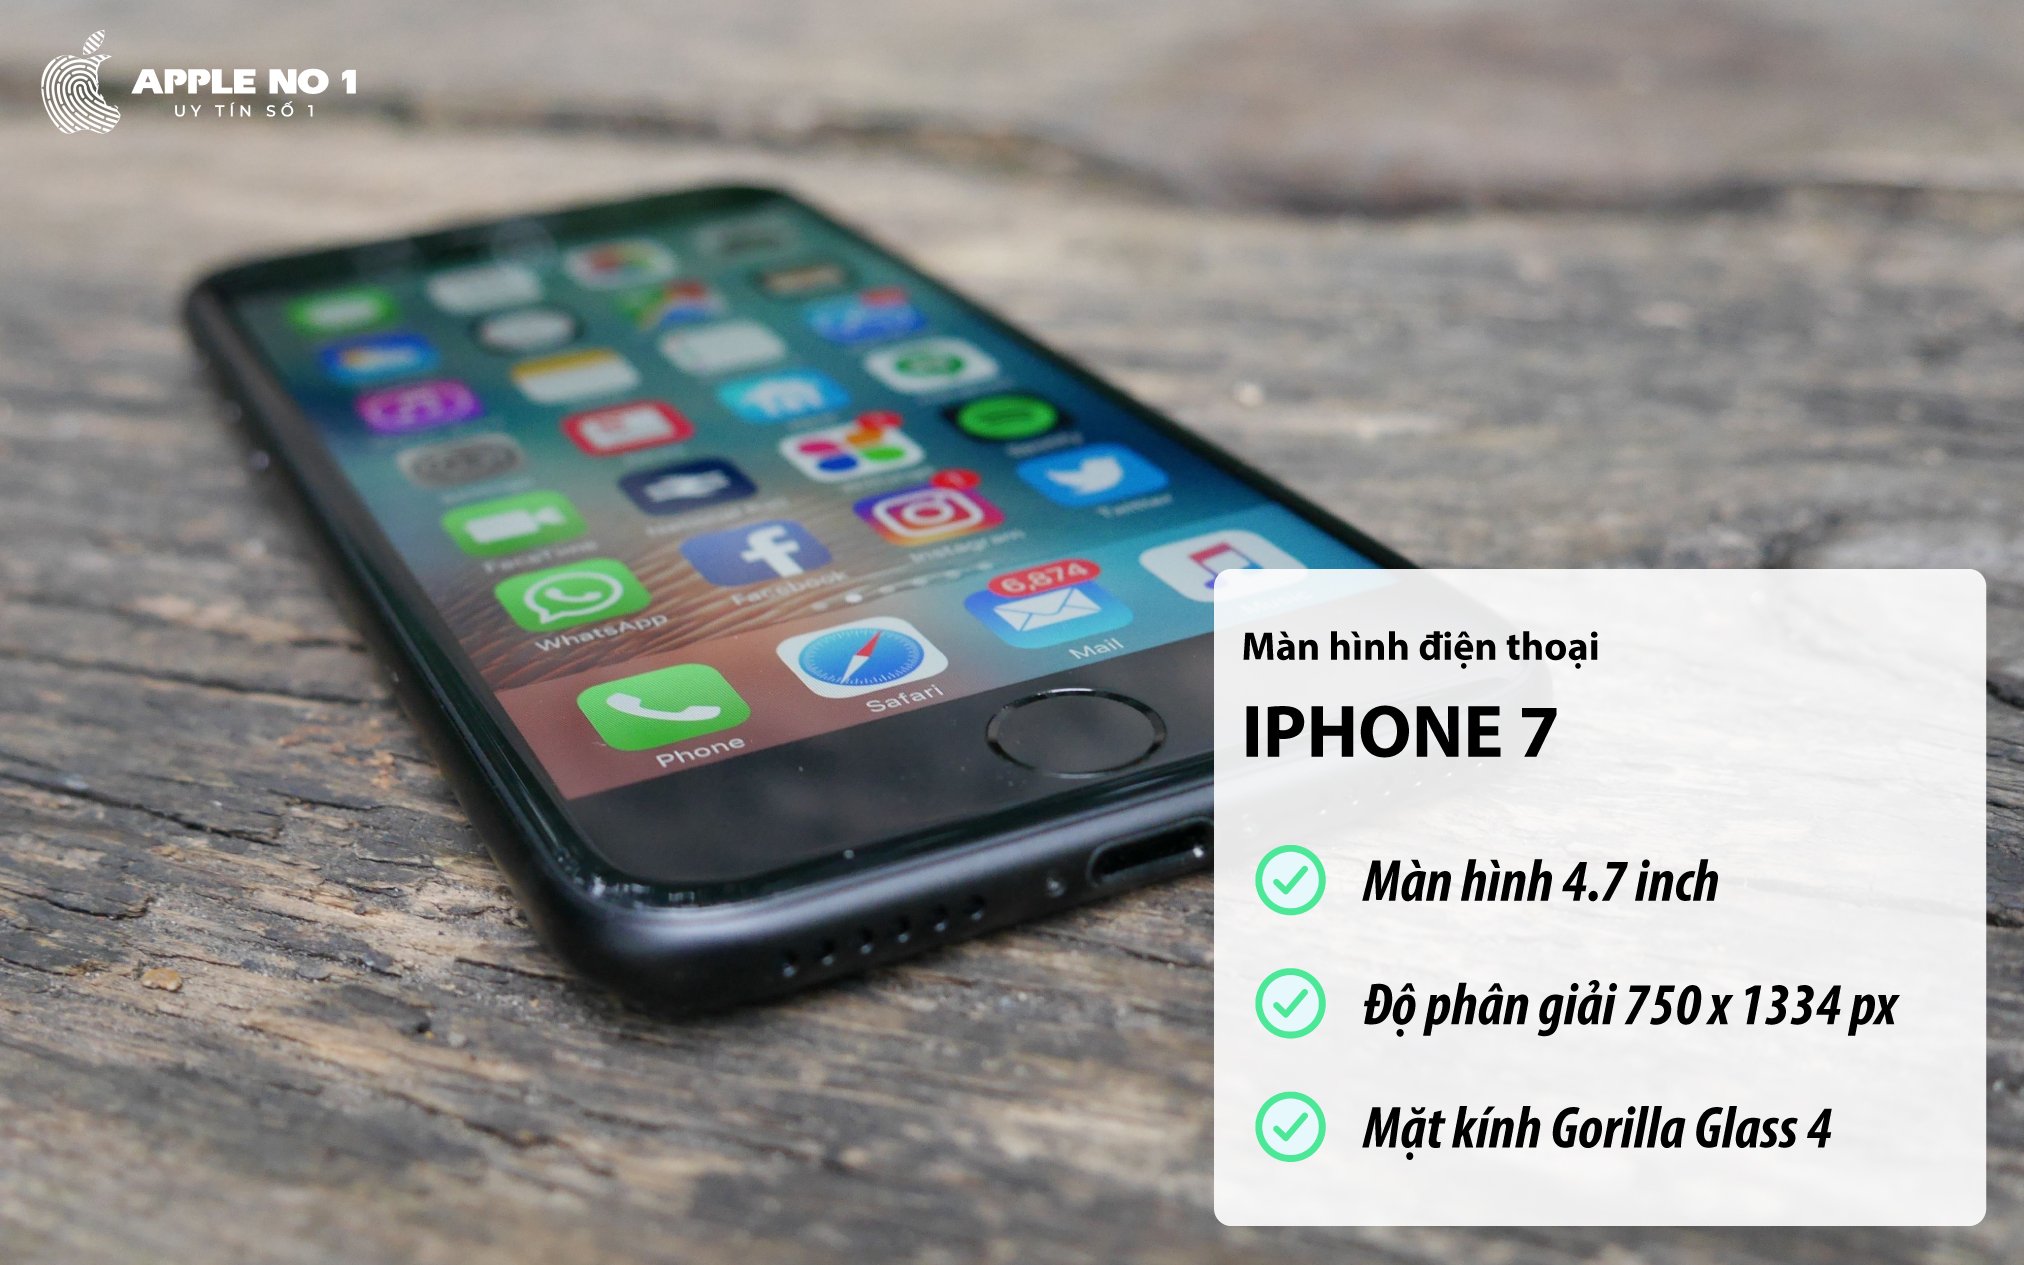 iphone 7 voi man hinh HD va ho tro cong nghe 3d touch